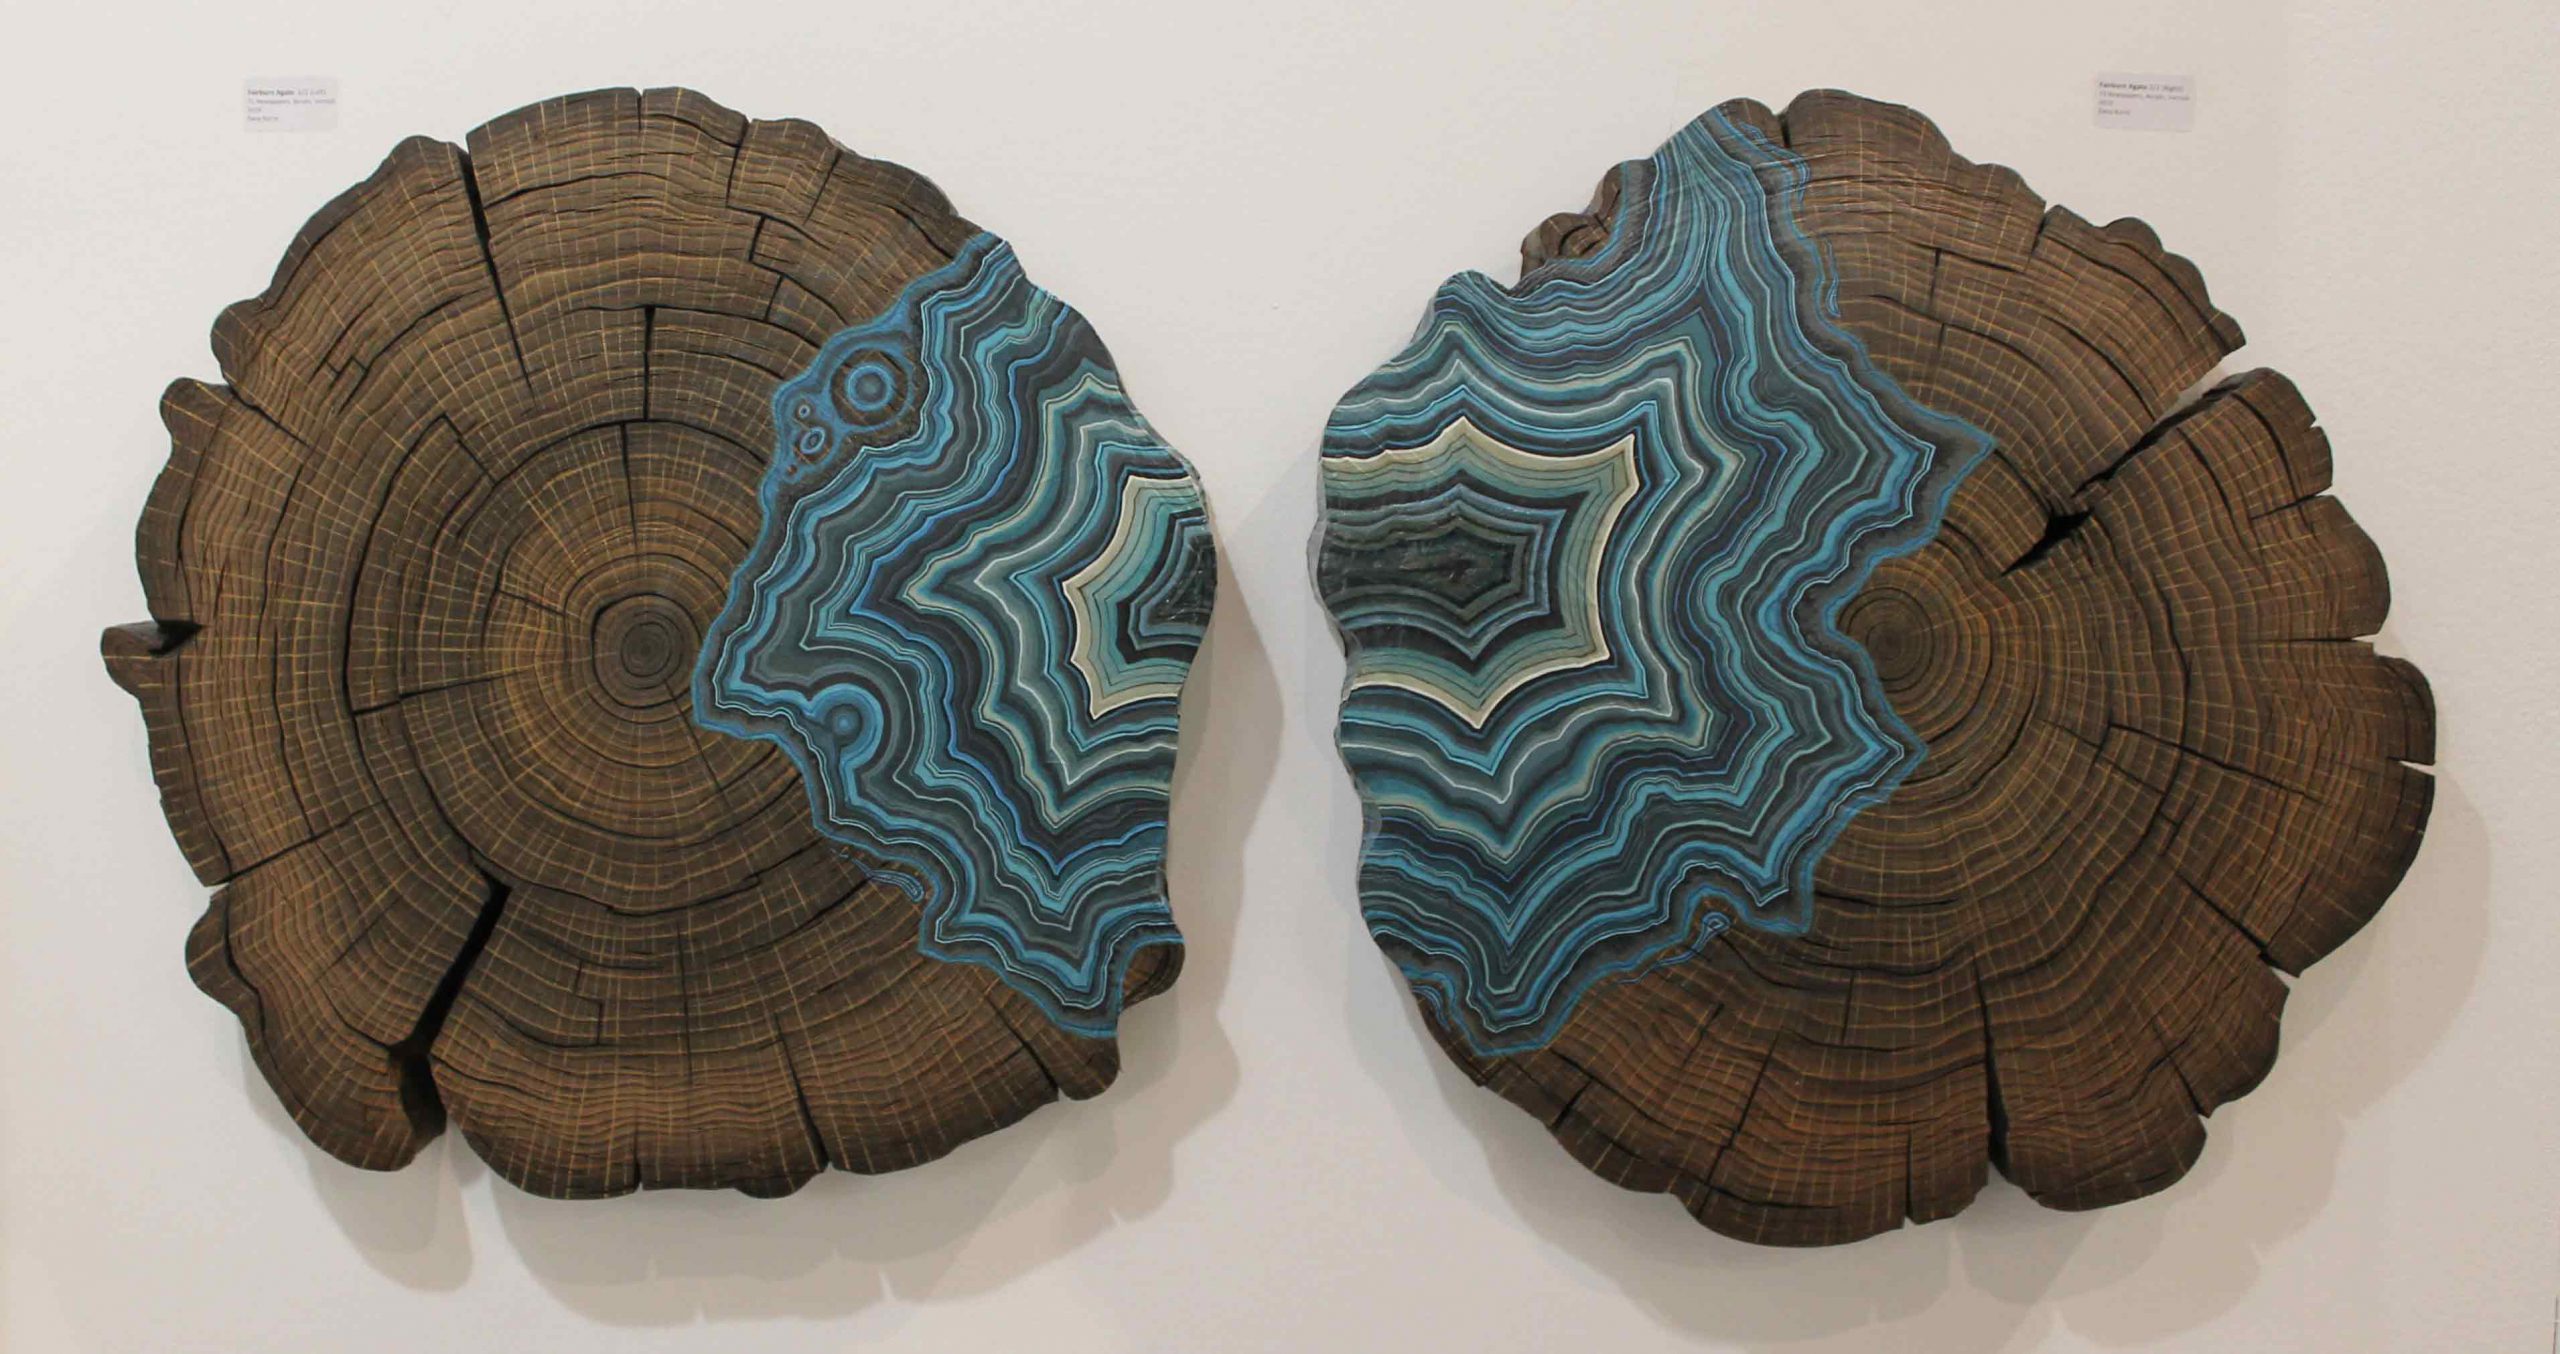 A series of artistic forms that replicate the look of the top of wood stumps with infused mineral coloured resin.